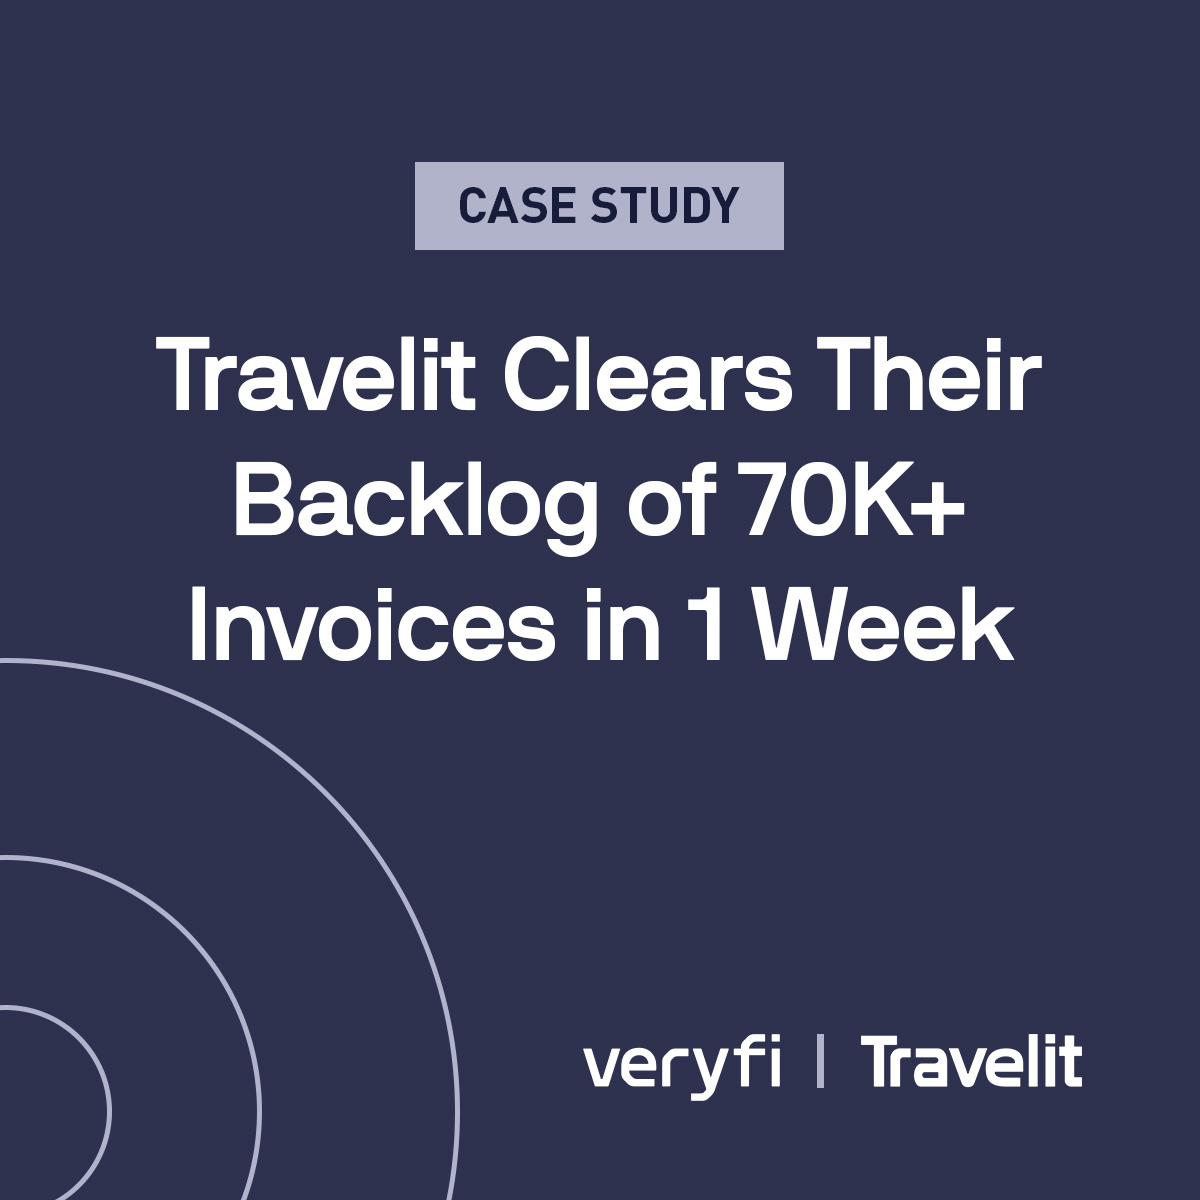 Travelit Clears Their Backlog of 70k+ Invoices in 1 Week